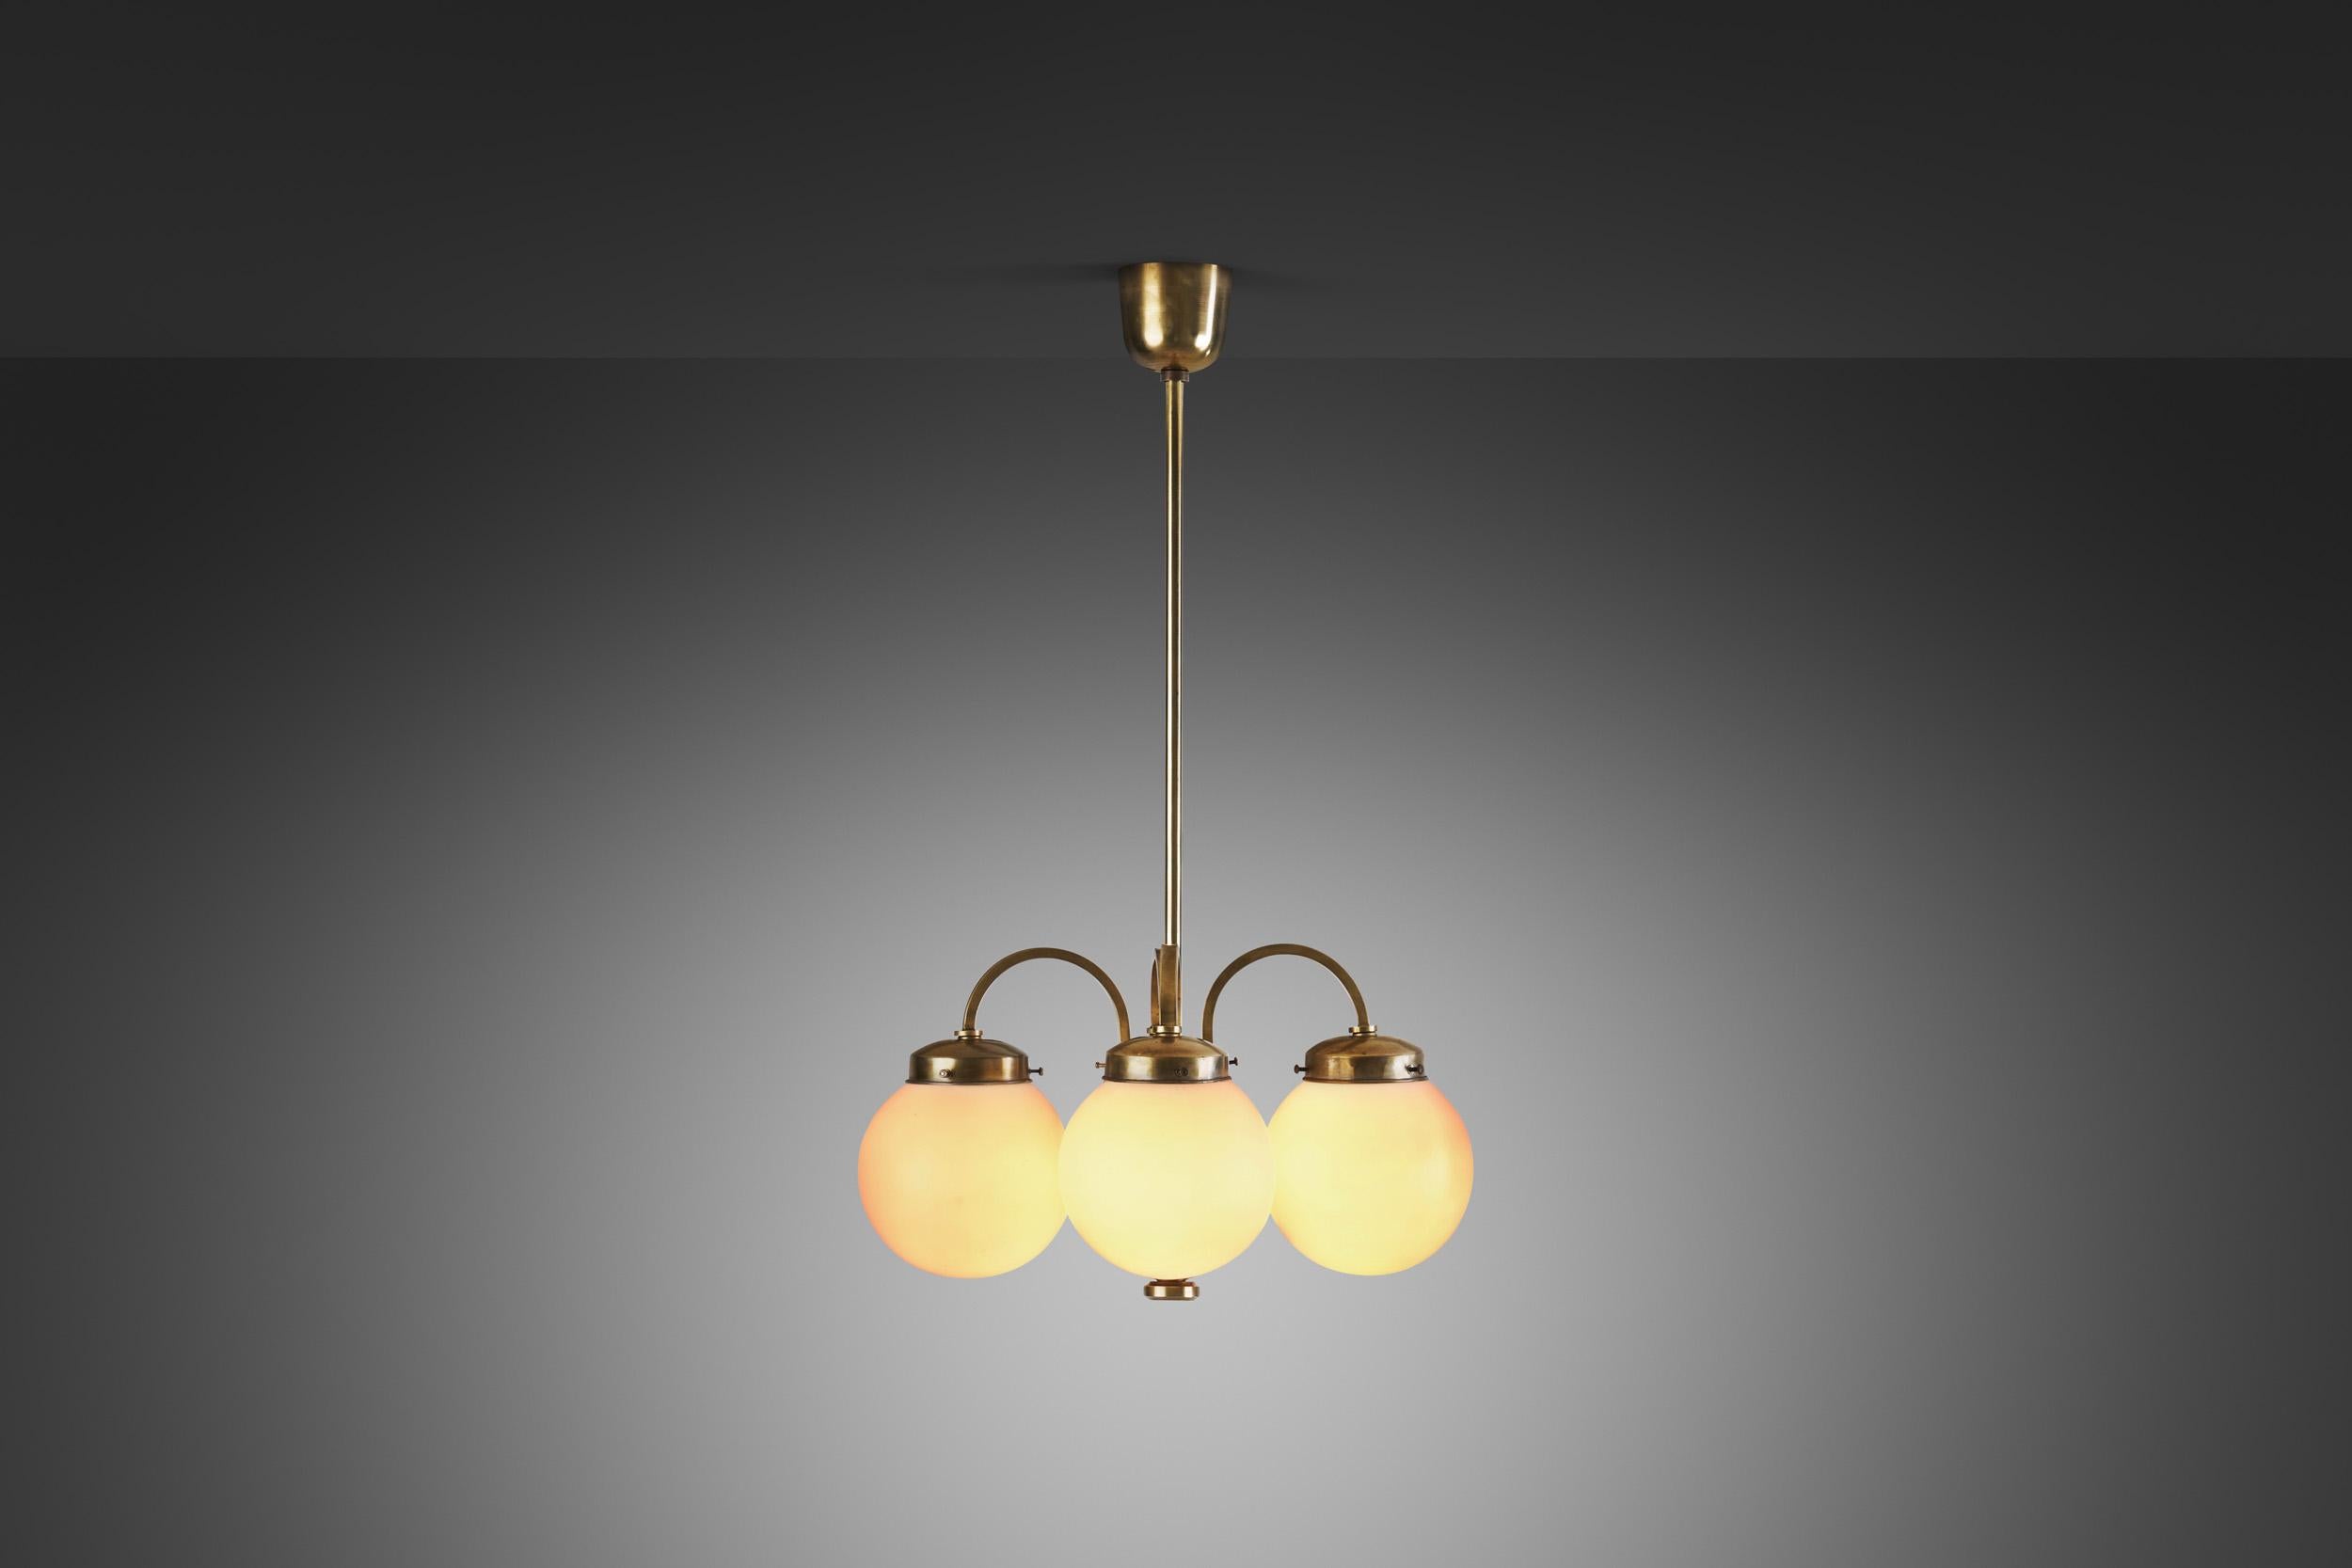 Materials were key elements of modern lighting design, and nothing speaks mid-century modern more than the combination of metals, such as brass and glass. At its most basic level, mid-century modern designs are known for their sleek lines with